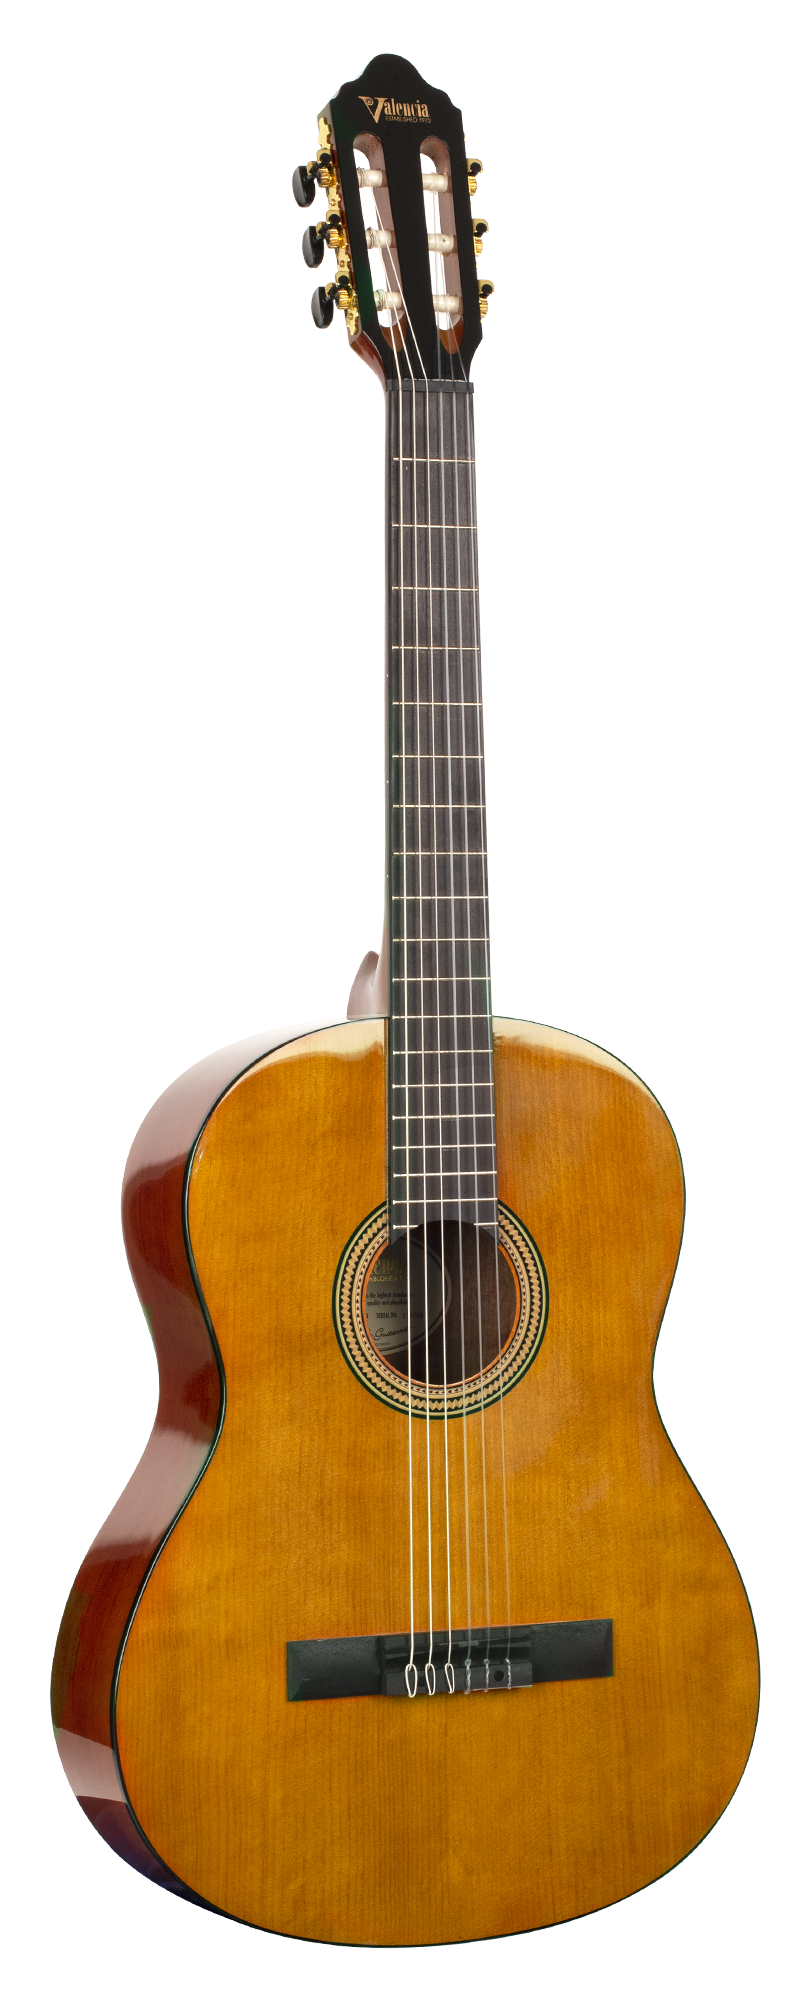 Valencia VC264H Full Size Classical Guitar with Hybrid, Thin Neck - Antique Natural